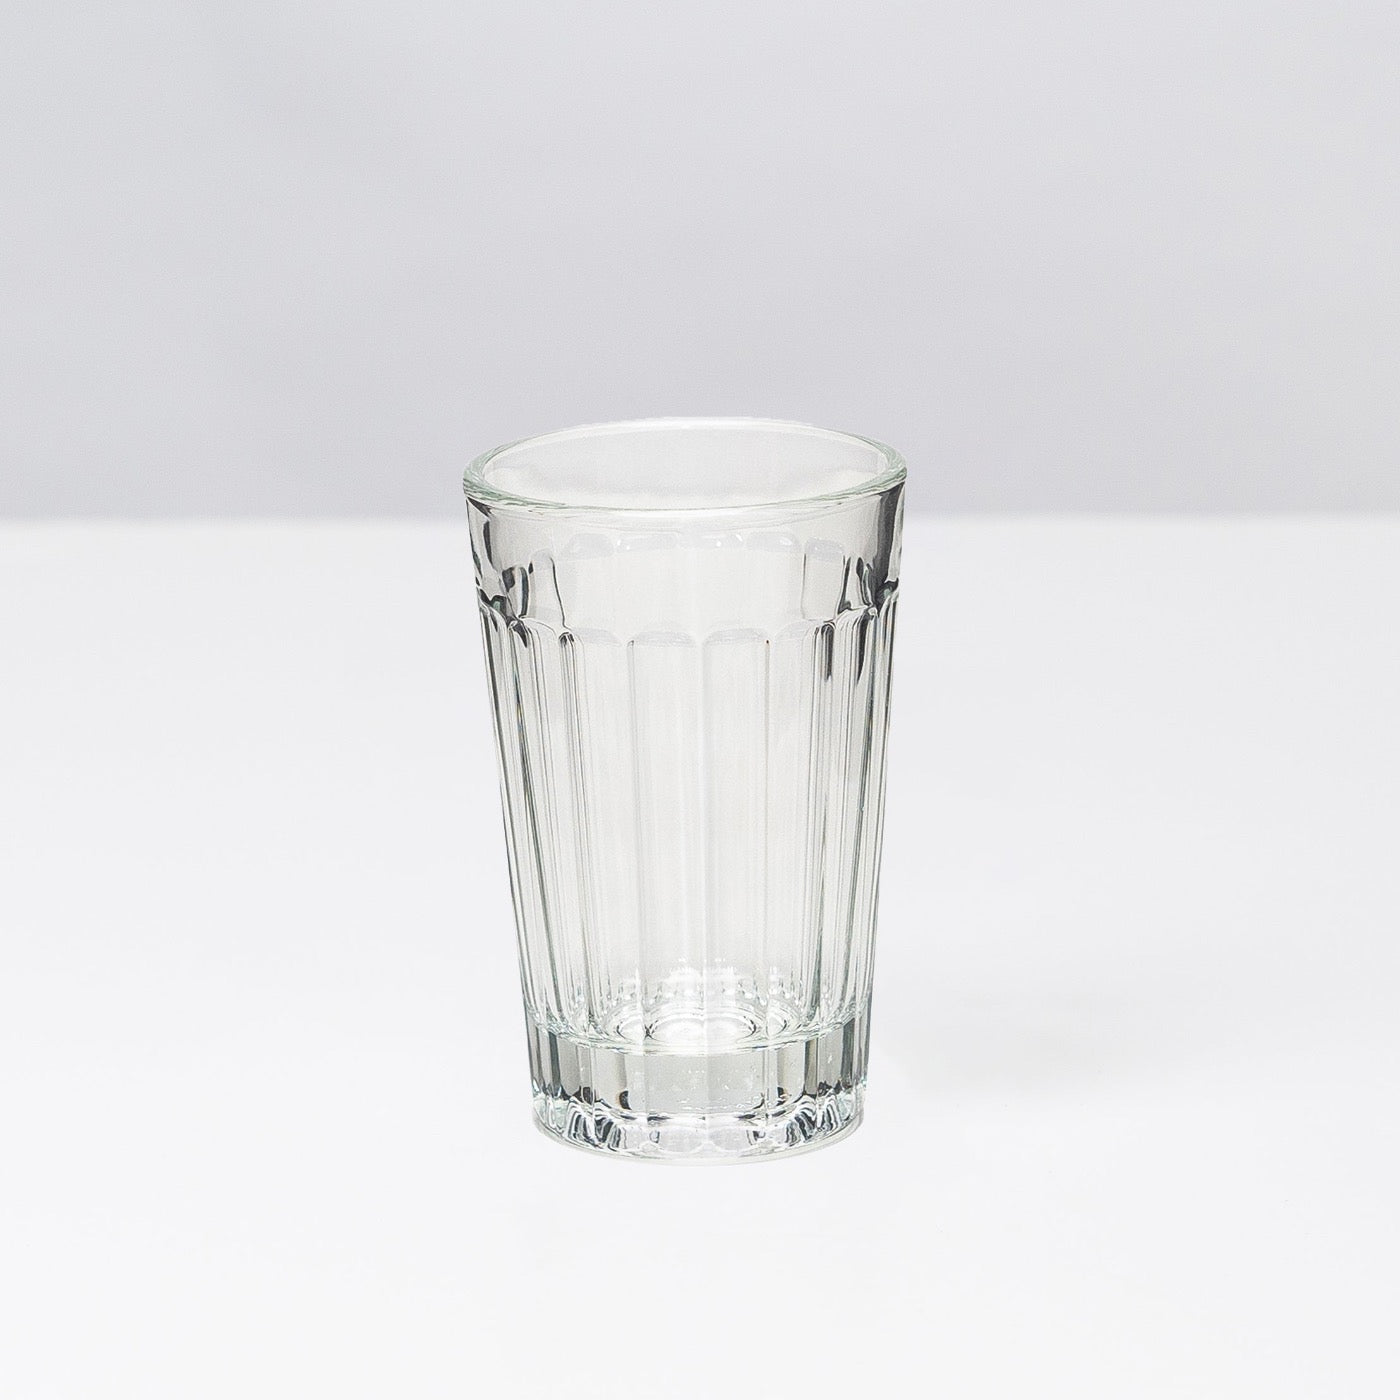 Handblown everday glass tumblers made in portugal